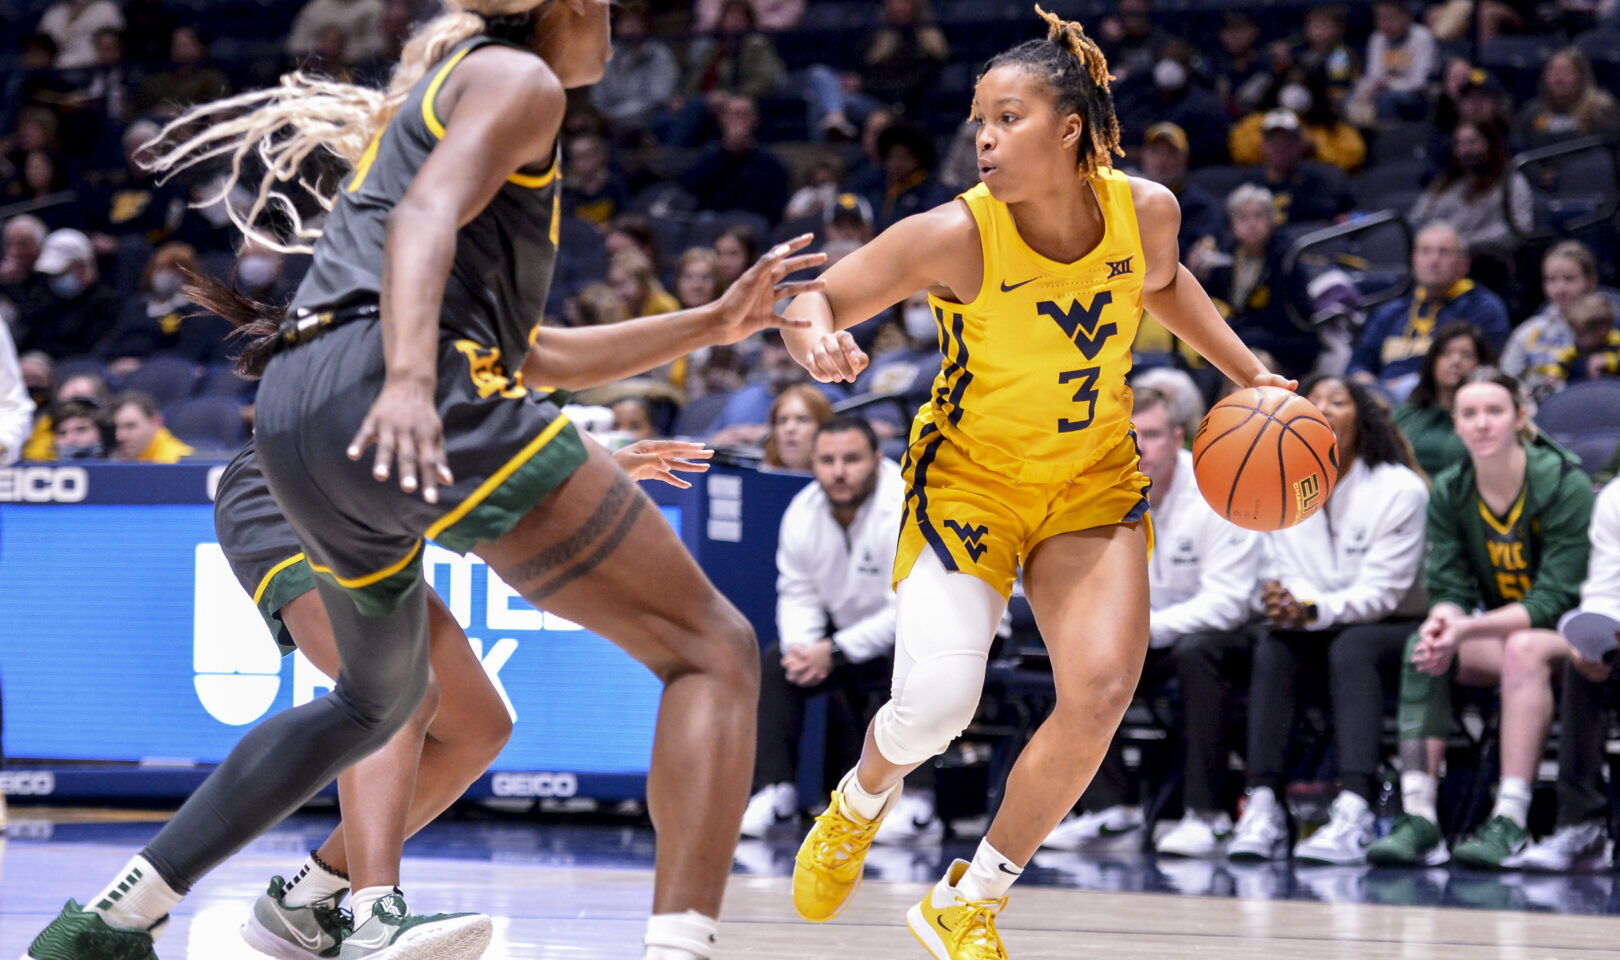 KK Deans goes down, WVU gets off to very slow start in 8754 loss to